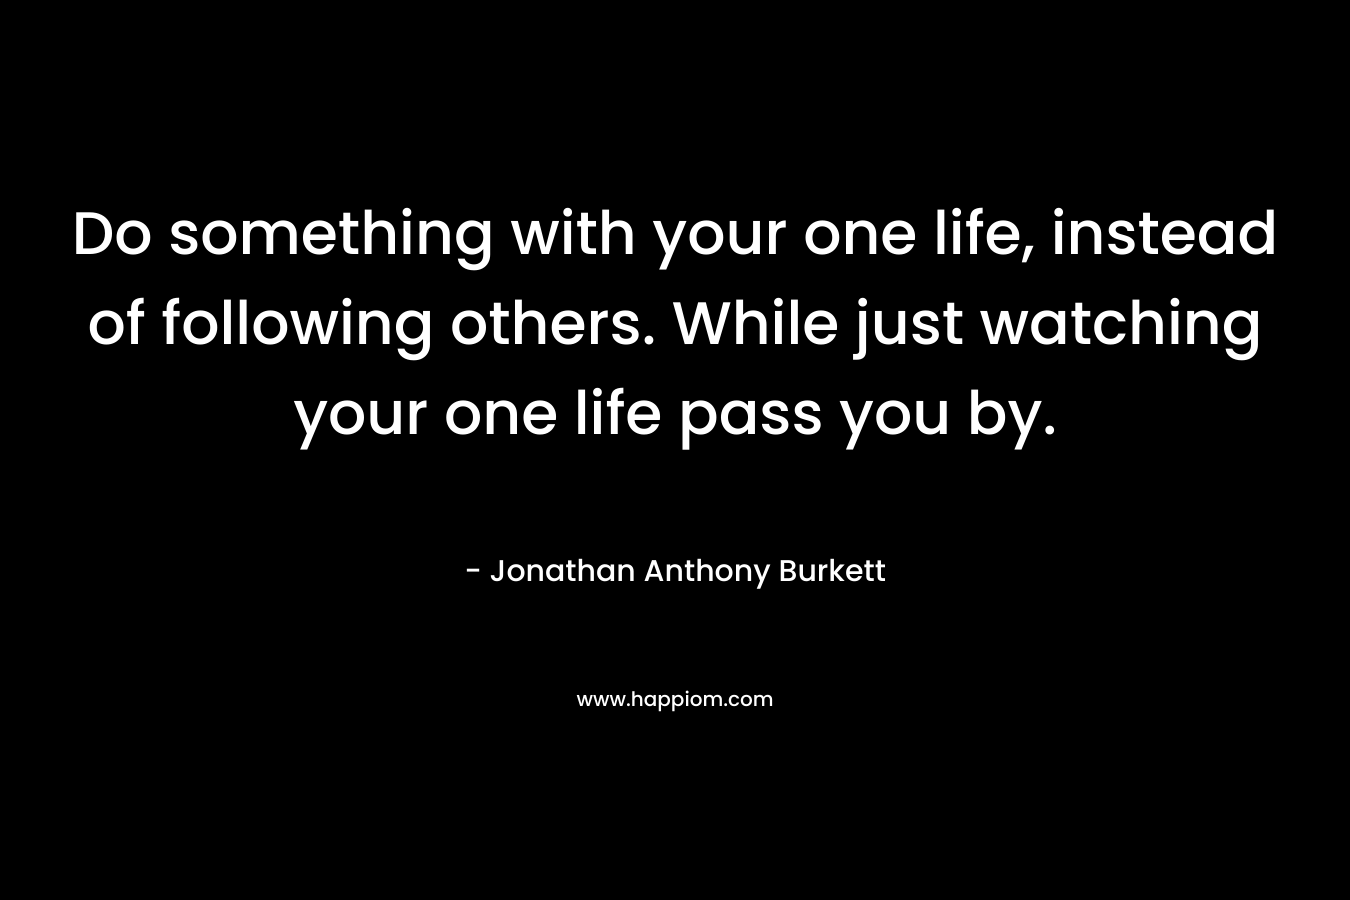 Do something with your one life, instead of following others. While just watching your one life pass you by.